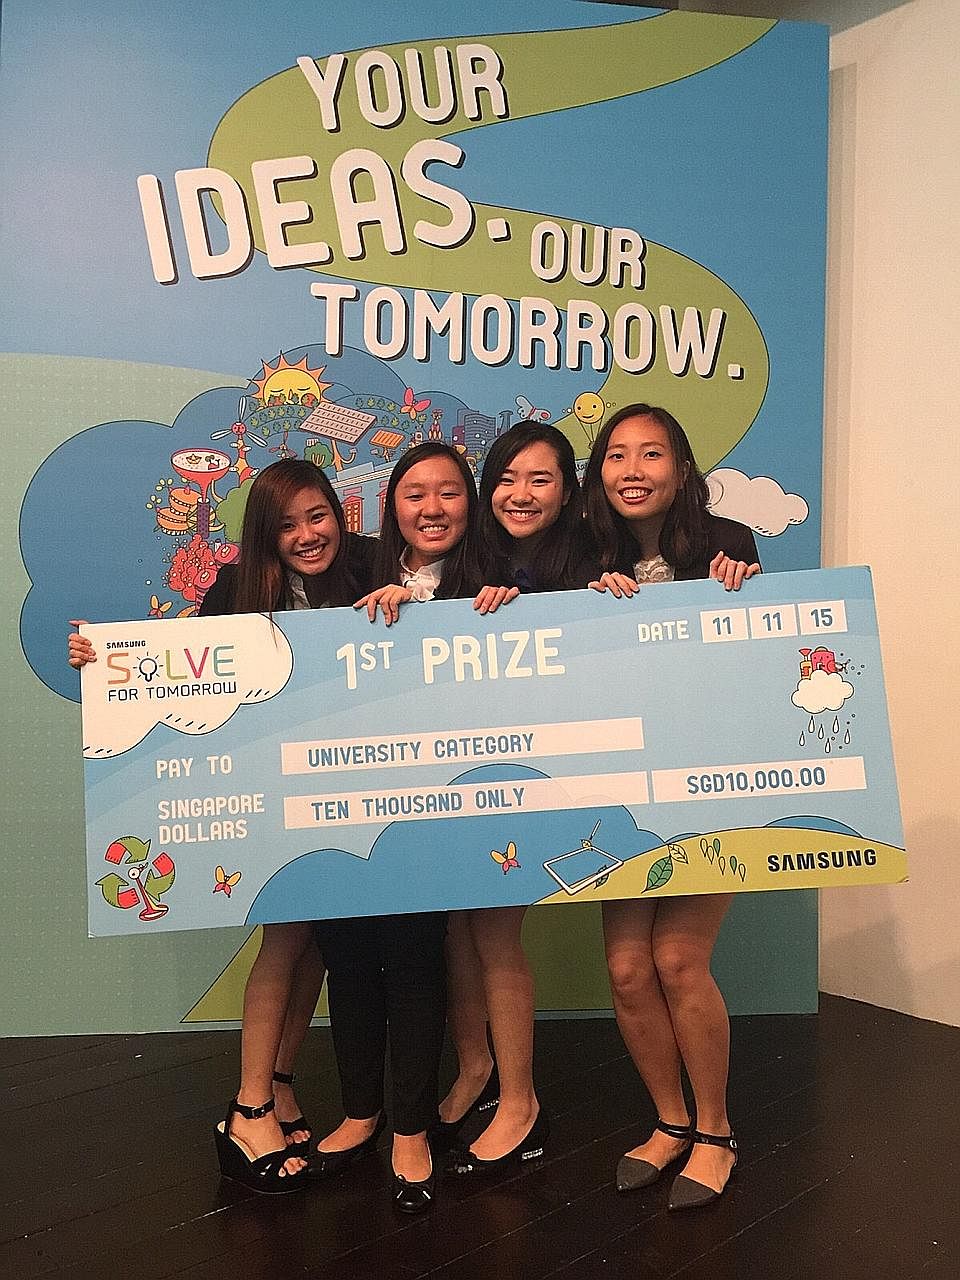 Members of the NTU team Sleeping Beauty (from left), Ms Chua Yi Bei, Ms Chan Jia Hui, Ms Jade Wee and Ms Lim Mee Mee, won the university category of the Samsung Solve for Tomorrow competition in 2015.